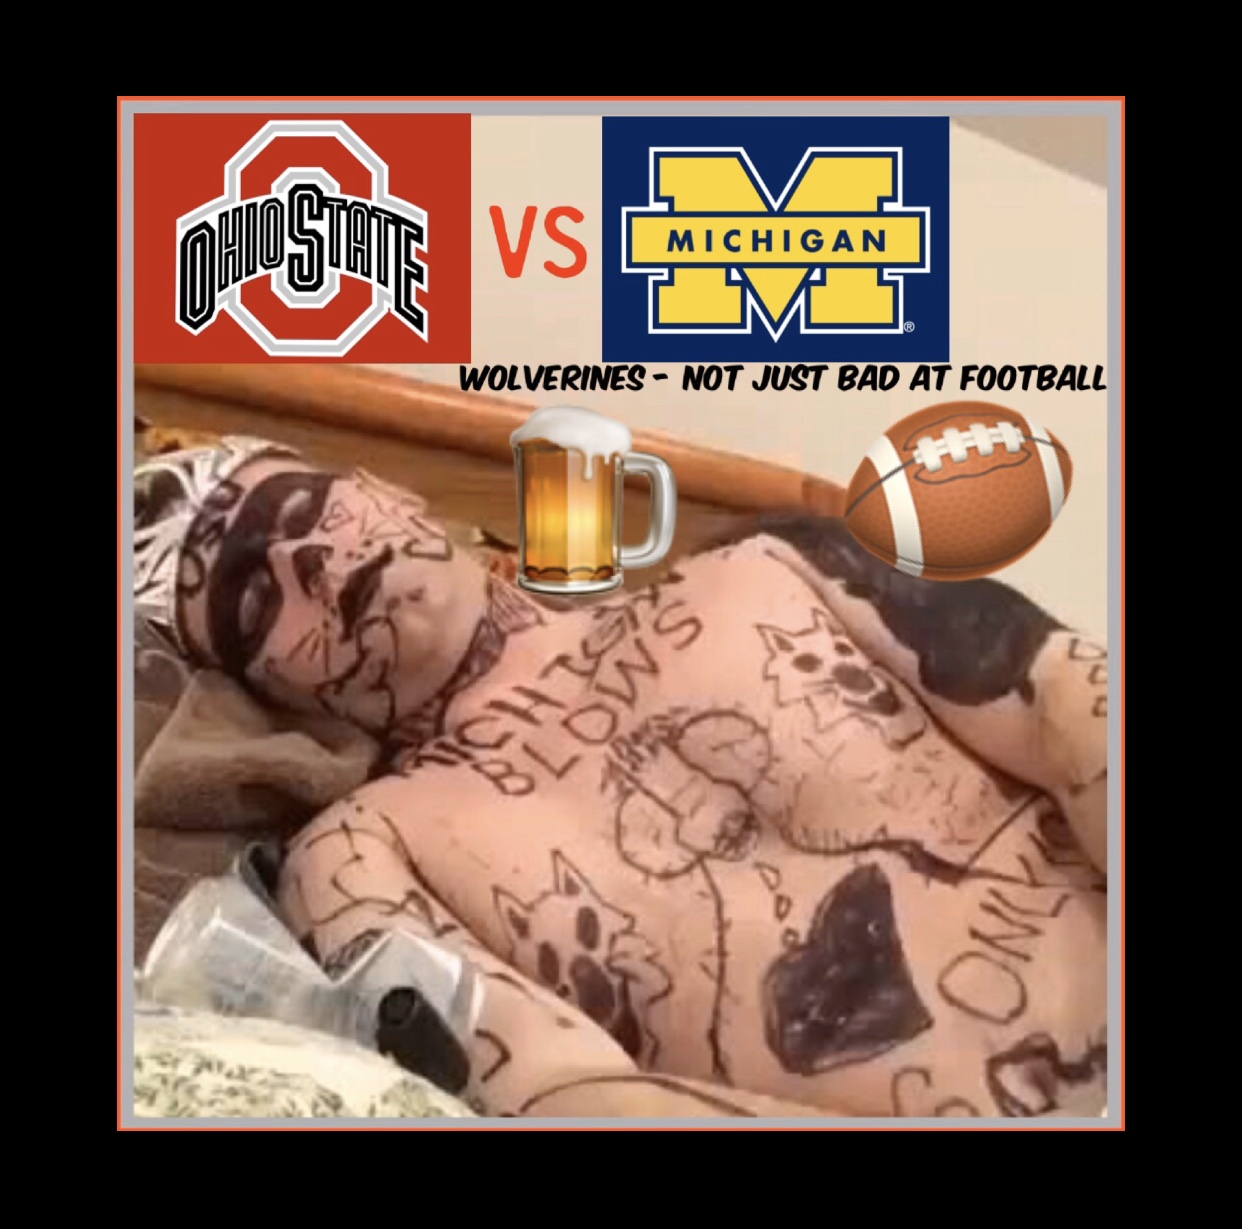 ohio state buckeyes - Michigan Wolverines Not Just Bad At Football